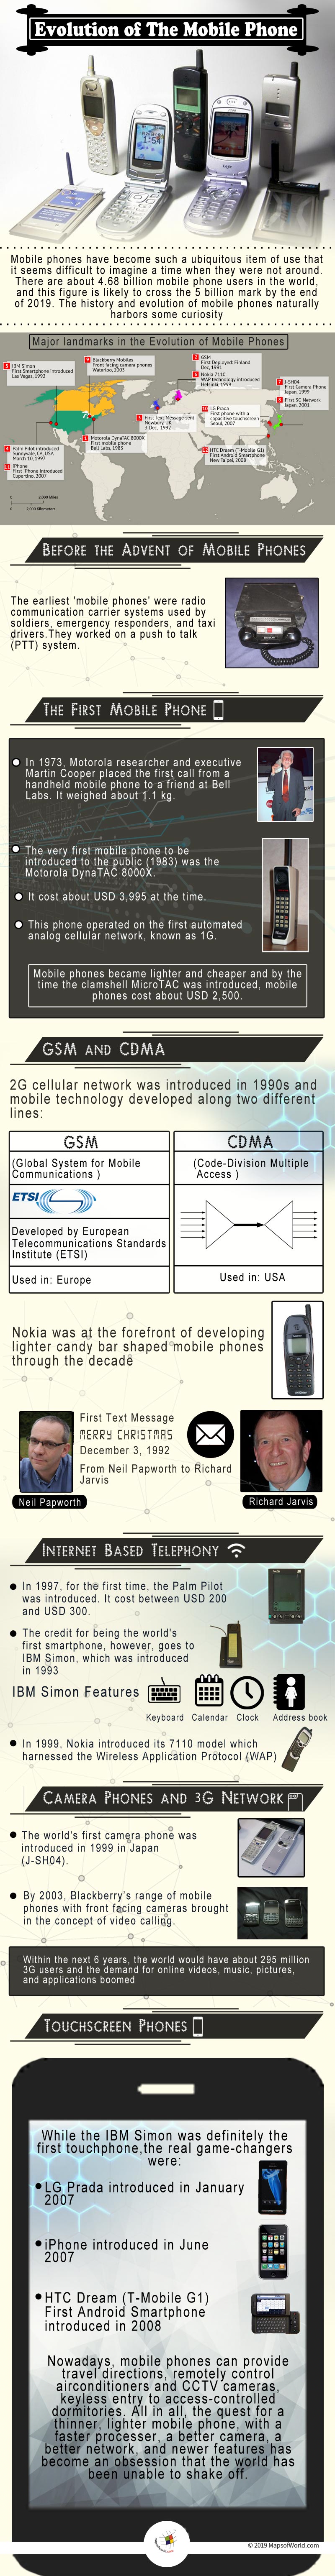 How did the Mobile Phones Evolve? - Answers